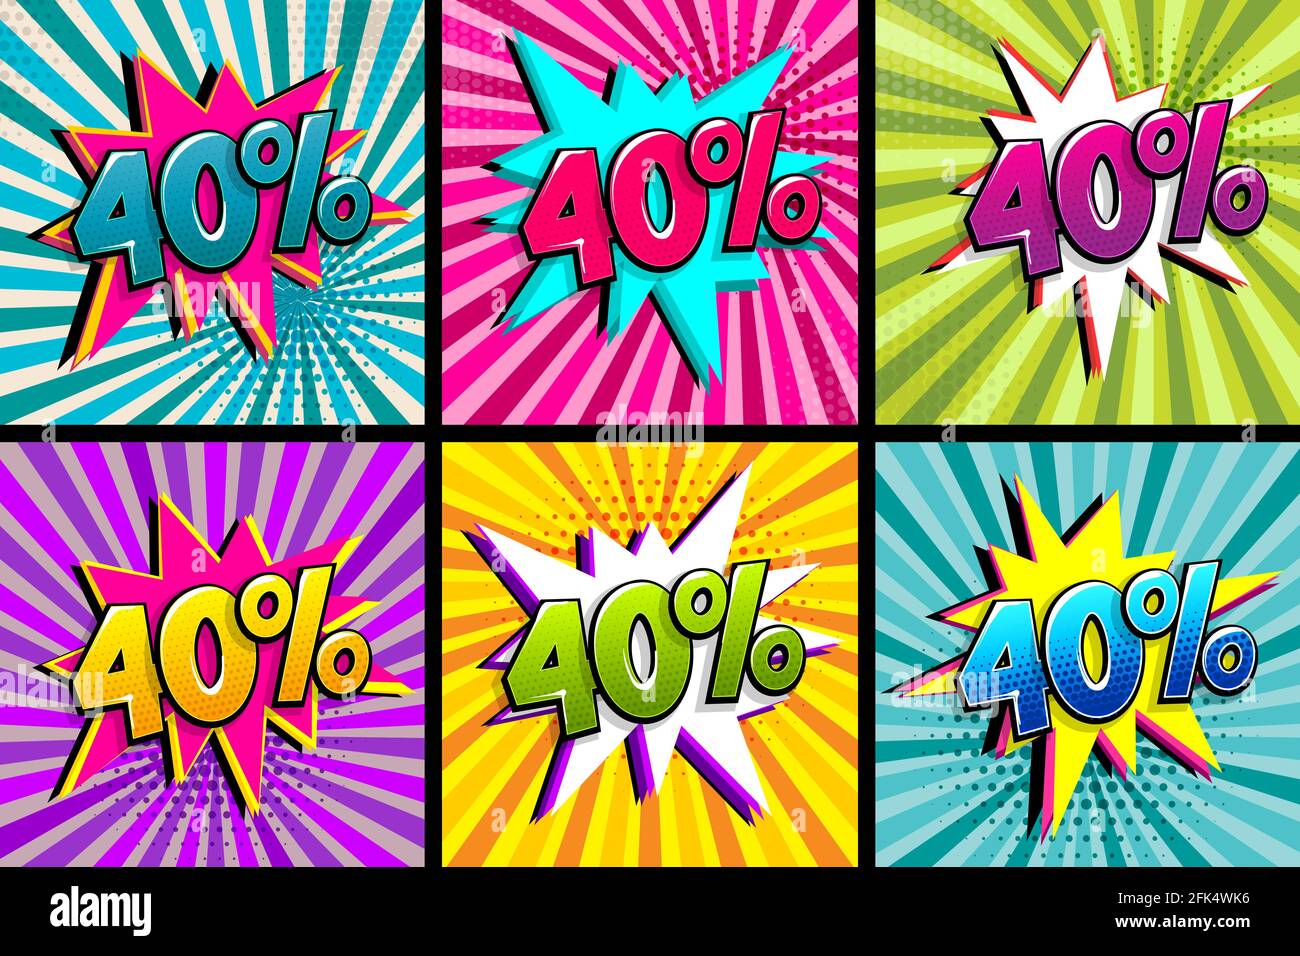 Comic text 40 percent sale set discount. Colored speech bubble on radial background. Comics book explosion wow boom offer collection. Halftone radial Stock Vector